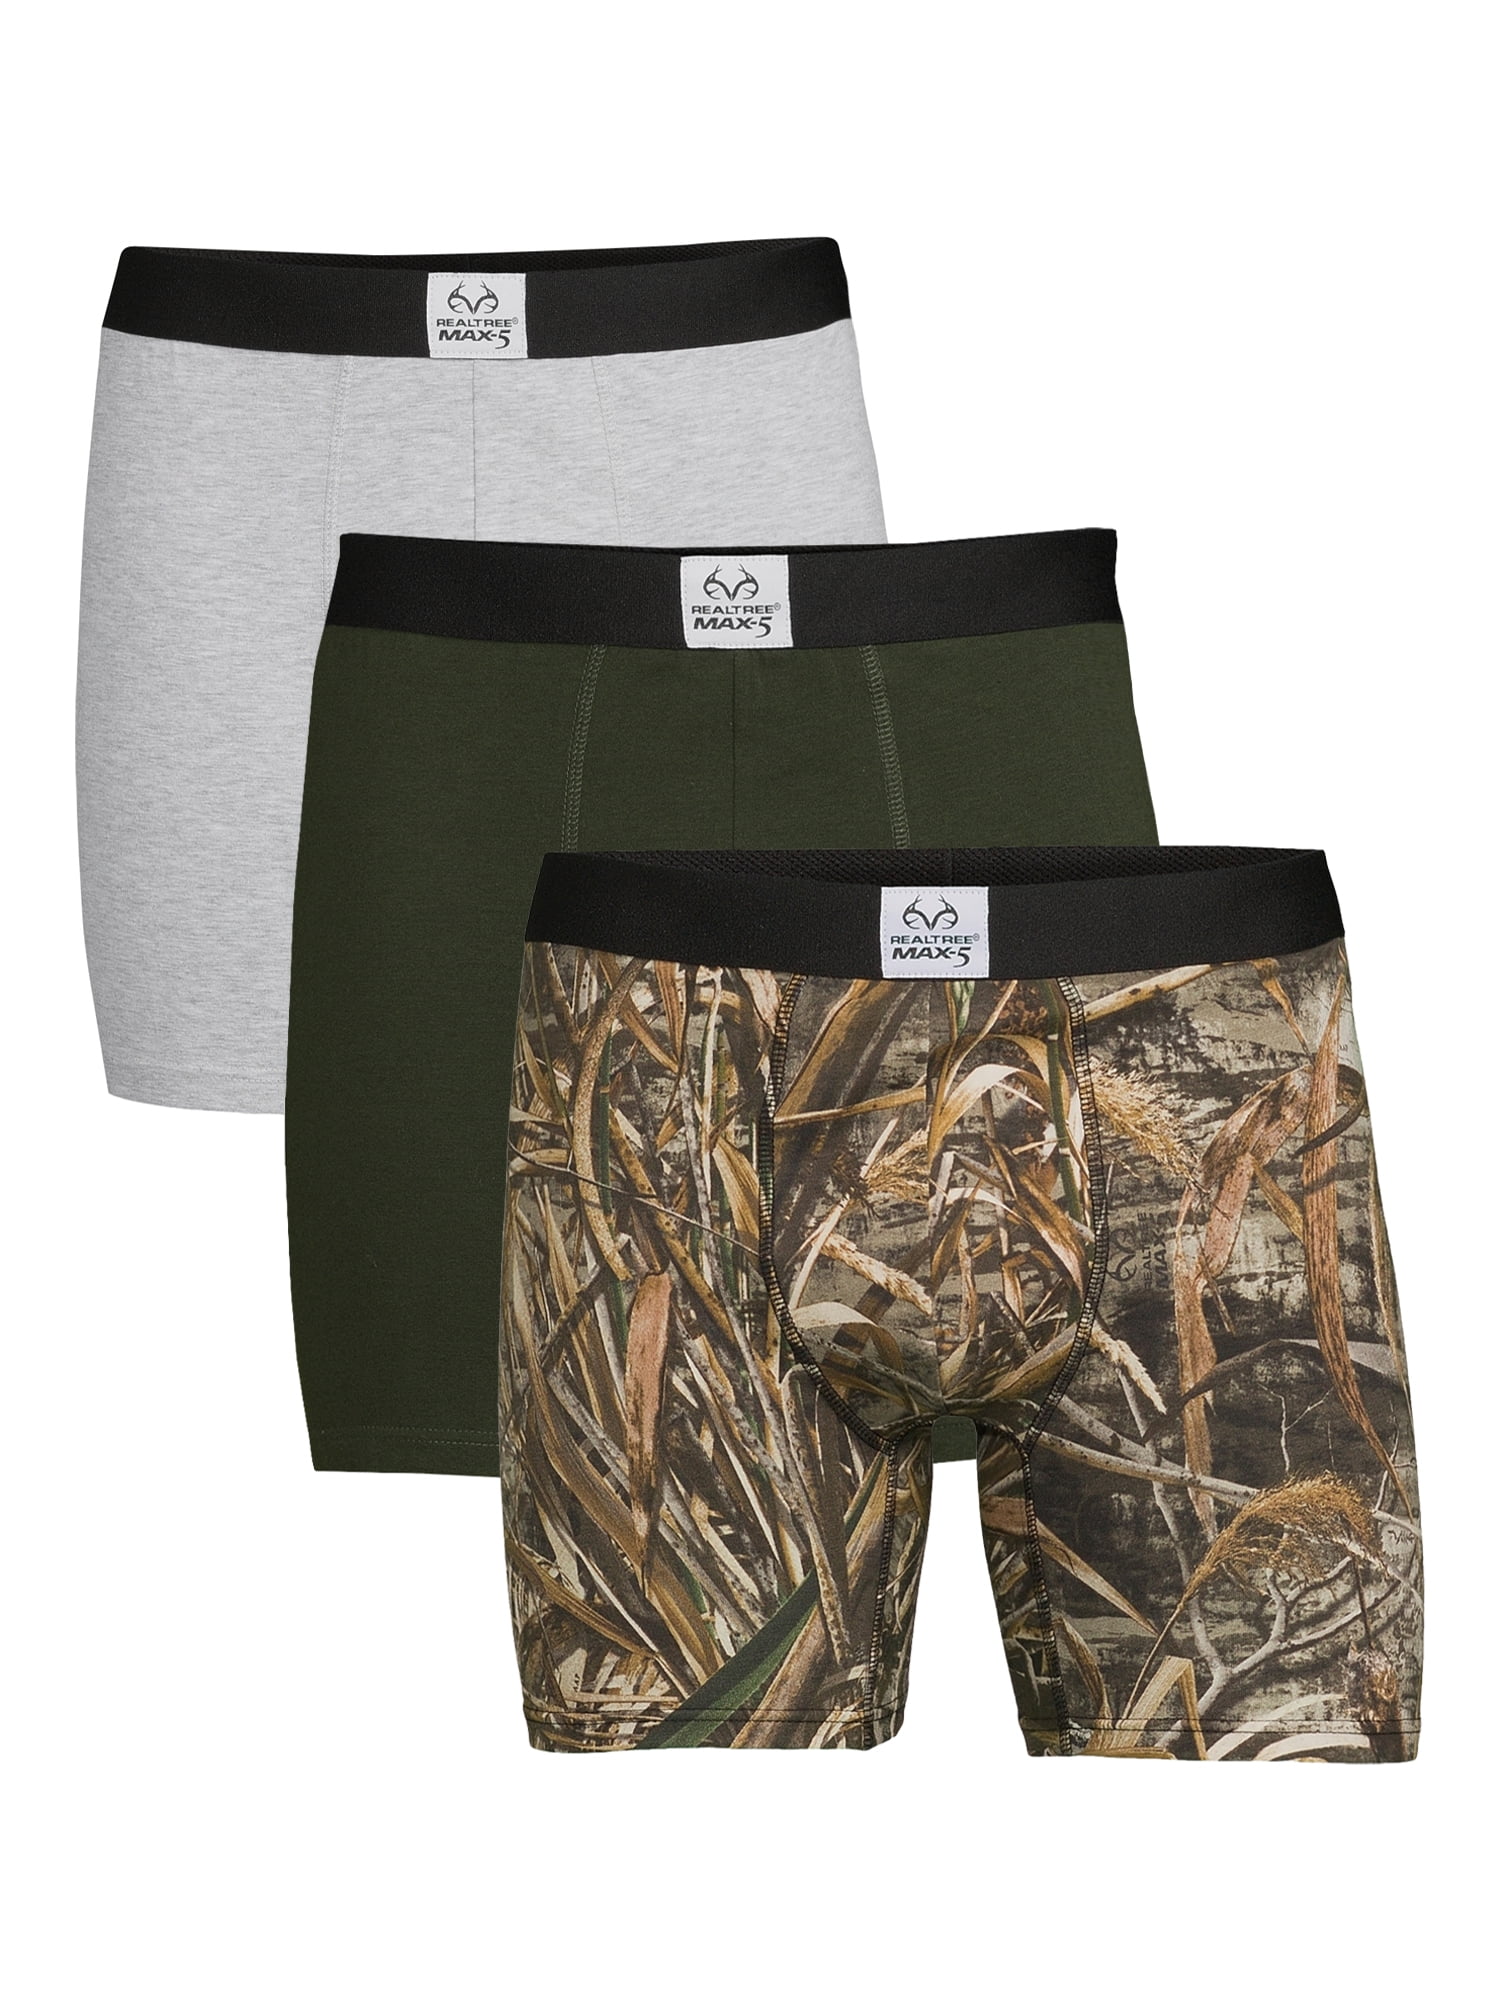 Boxer Adult Sizes Stretch Realtree 3-Pack Mens Briefs, S-XL Cotton